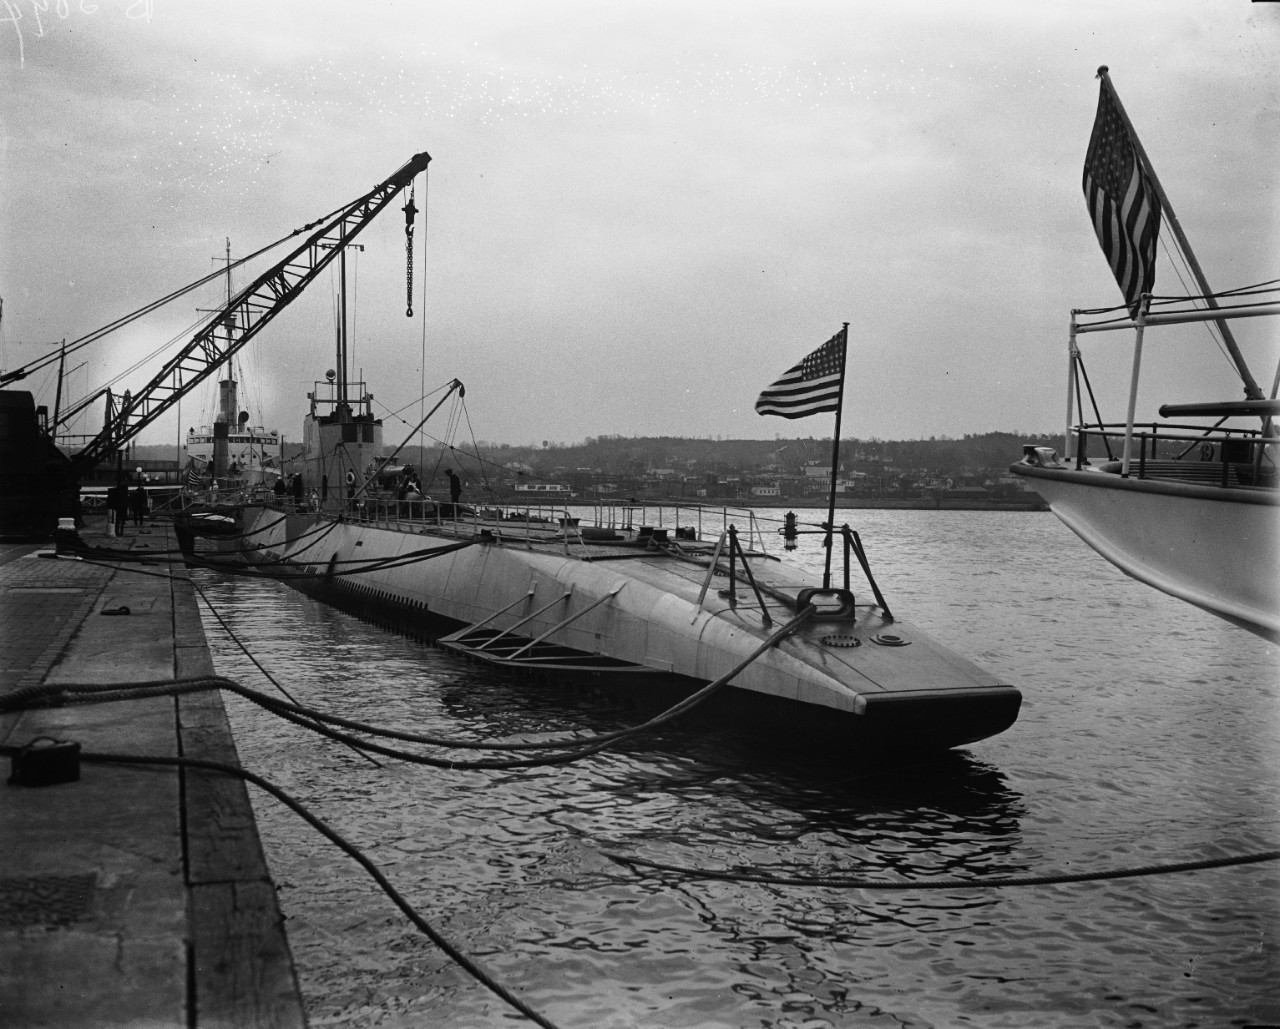 LC-DIG-HEC-35178:   USS V-4, Washington Navy Yard, 1928.    USS V-4 arrives at the Washington Navy Yard, November 20, 1928.  Lieutenant Commander W. M. Quigley was her commanding officer during this time.  Photographed by Harris & Ewing.  V-4 later became USS Argonaut and was sunk by Japanese destroyers off Rabaul on January 10, 1943.   Courtesy of the Library of Congress.   